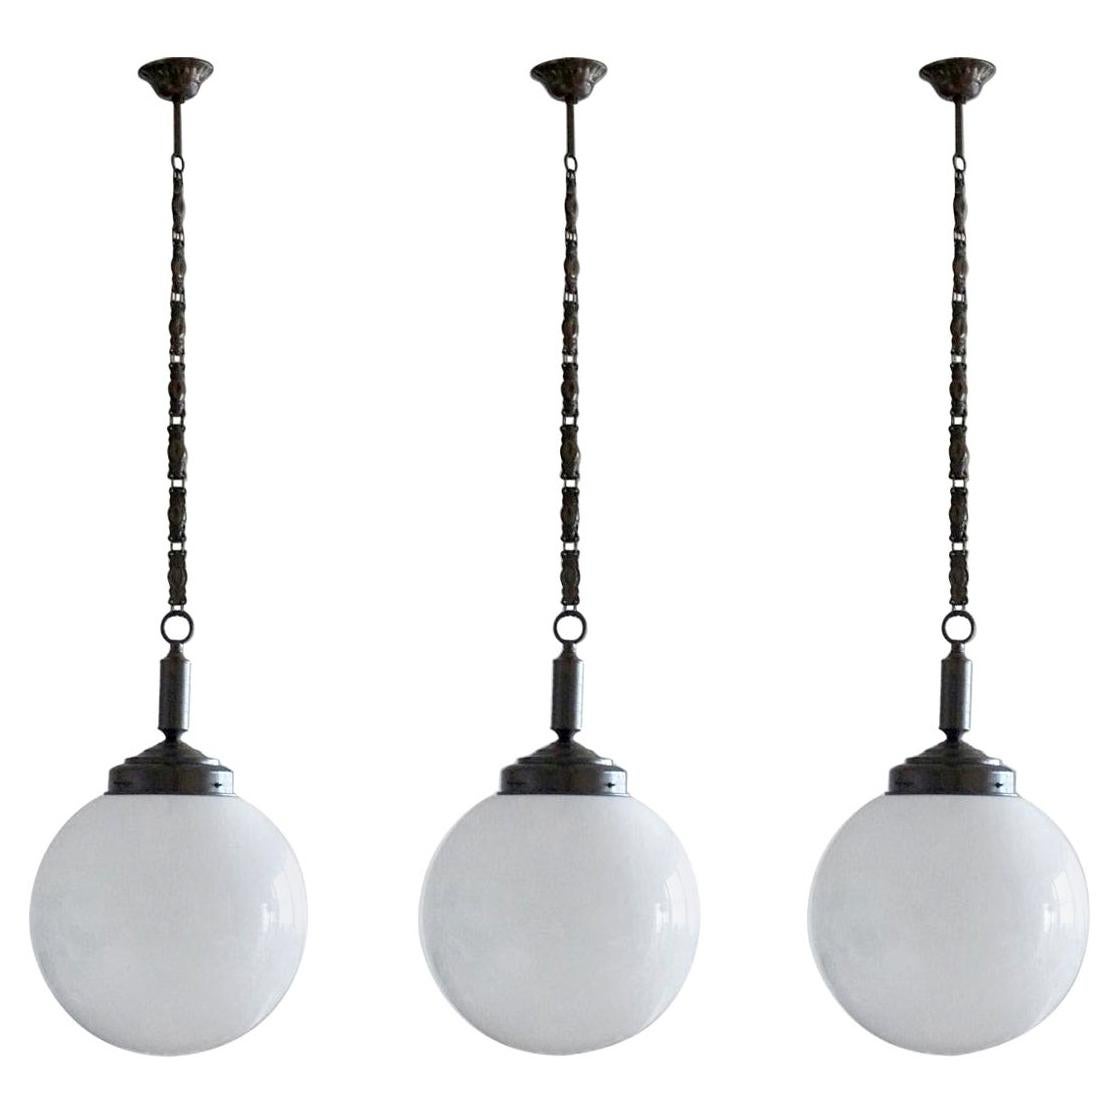 A set of three hand blown opaline glass ball pendants with burnished brass mounts, chain and canopy, Italy, 1930-1939.
One brass Edison E-27 light bulb socket for a large sized bulb up to 100W.
Measures: Diameter 12